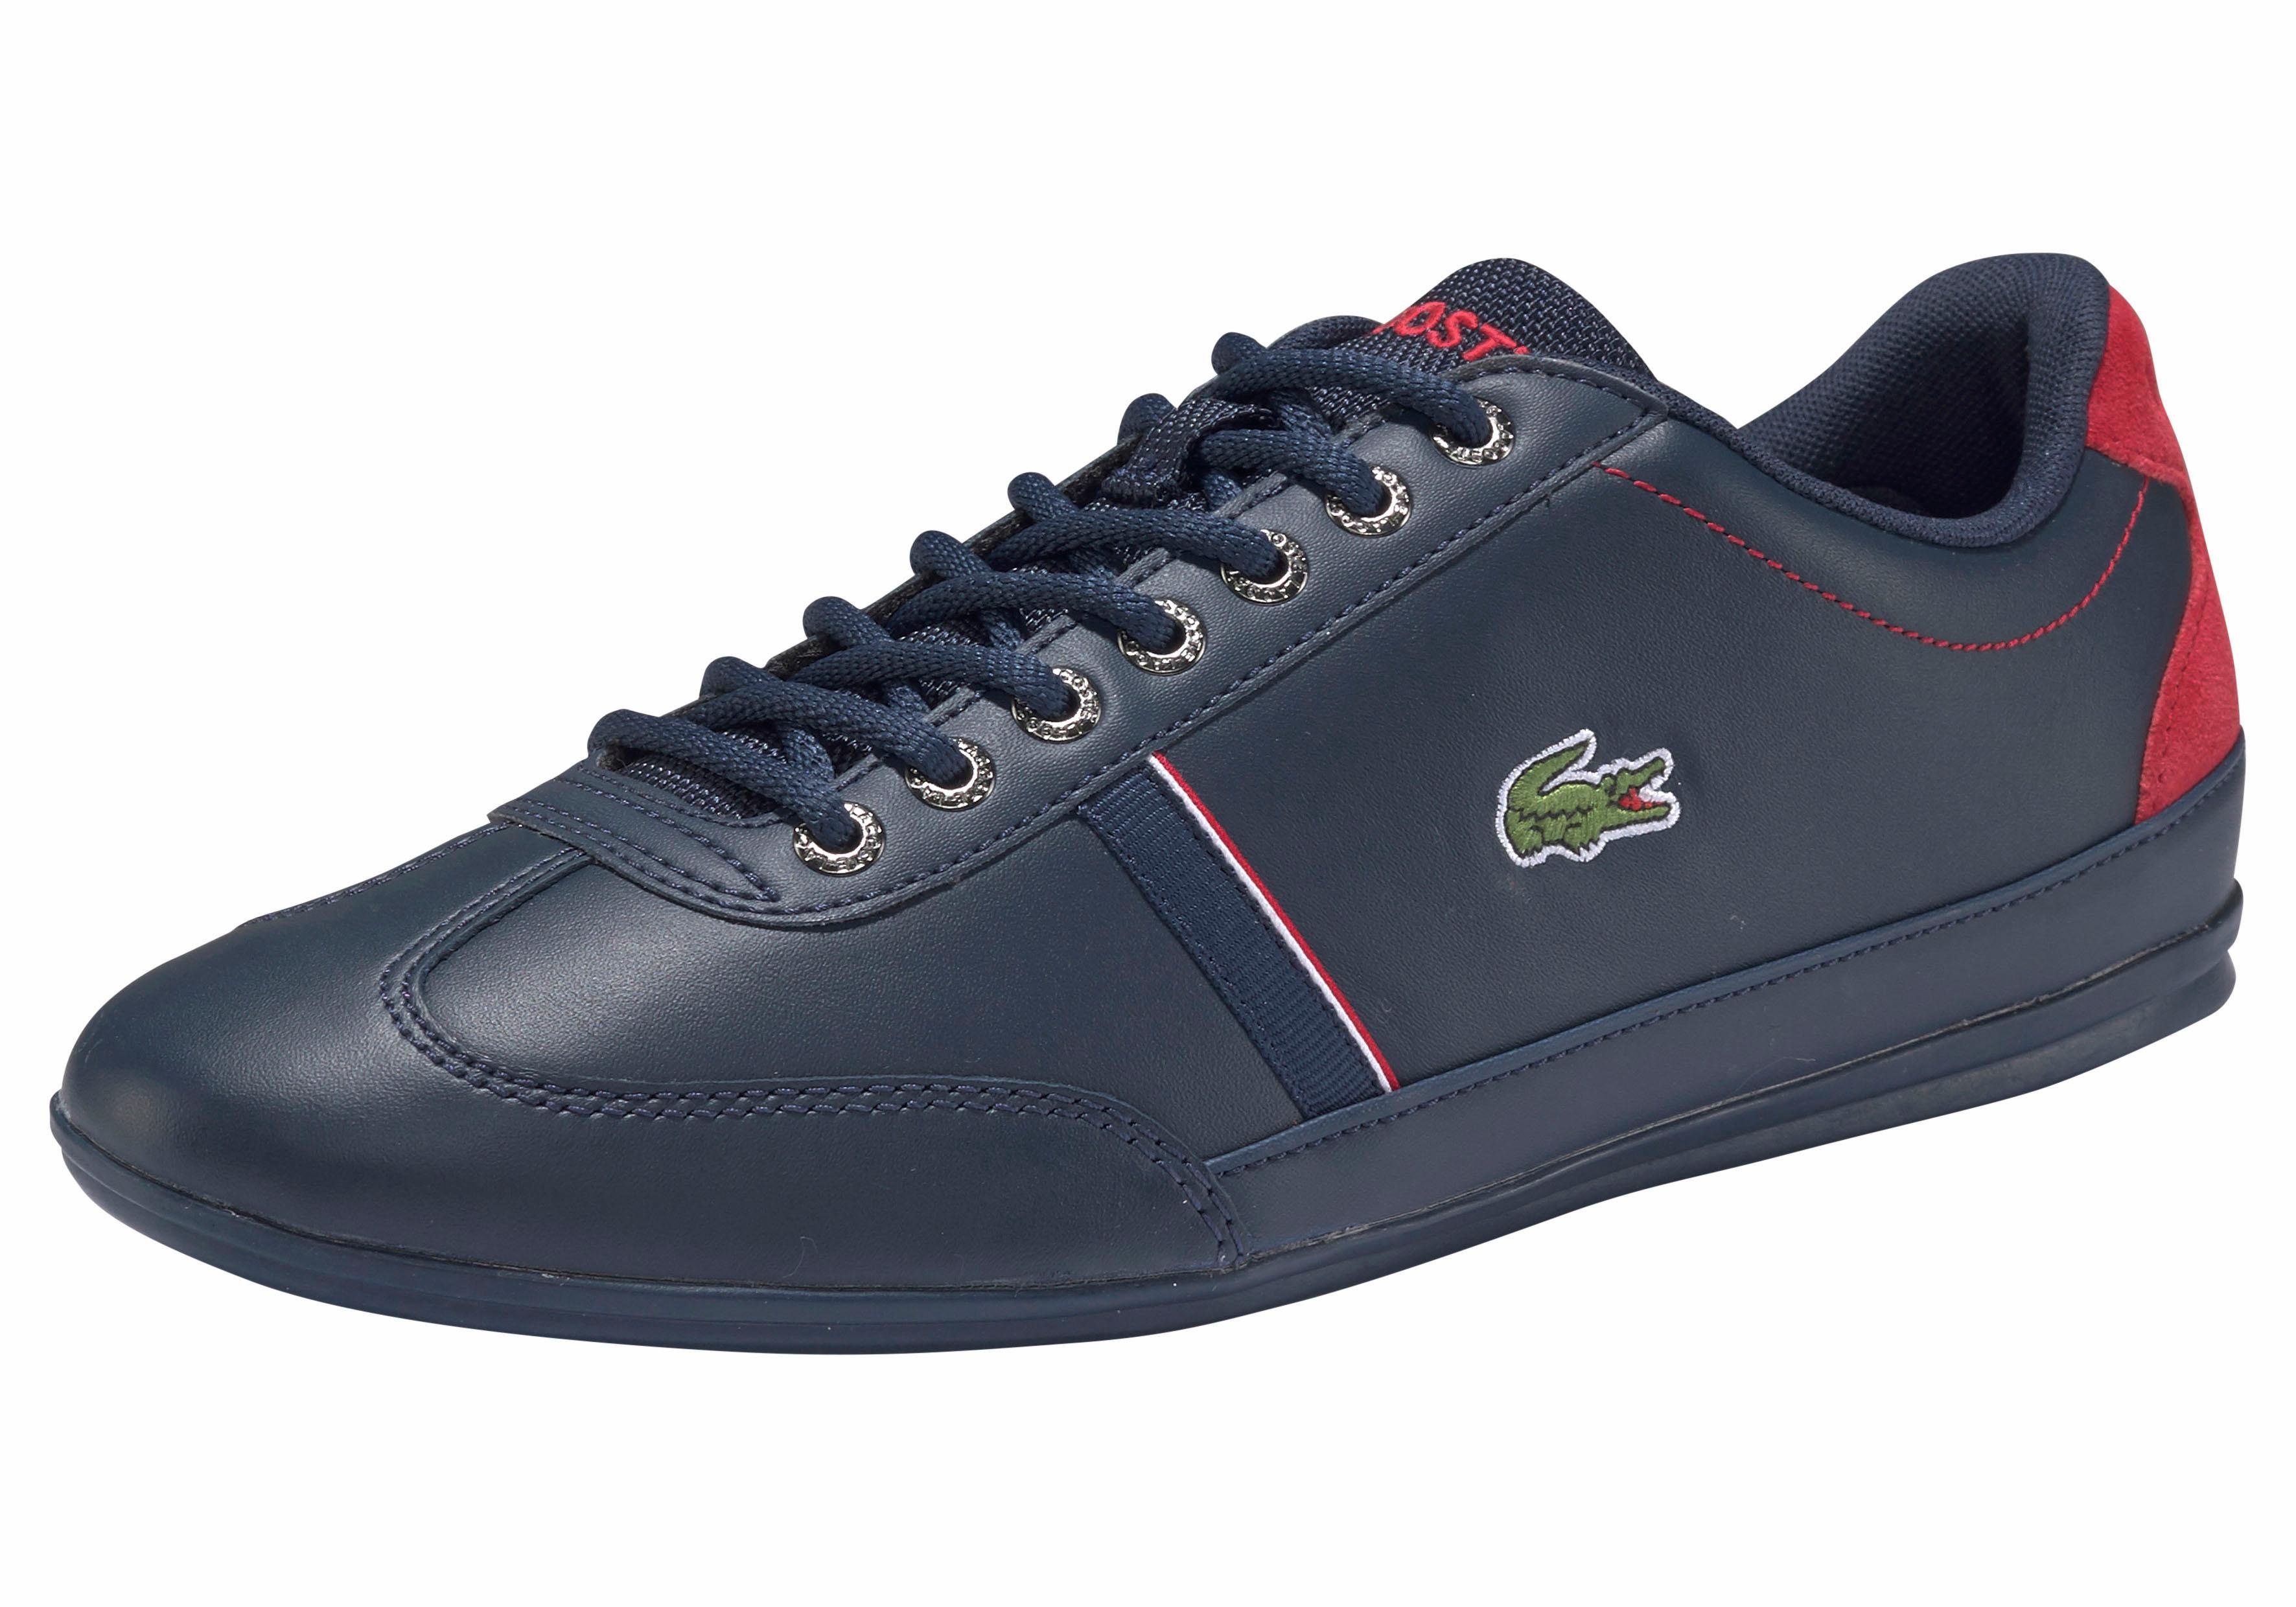 Otto - Lacoste NU 15% KORTING: Lacoste sneakers COURT-MASTER 118 2